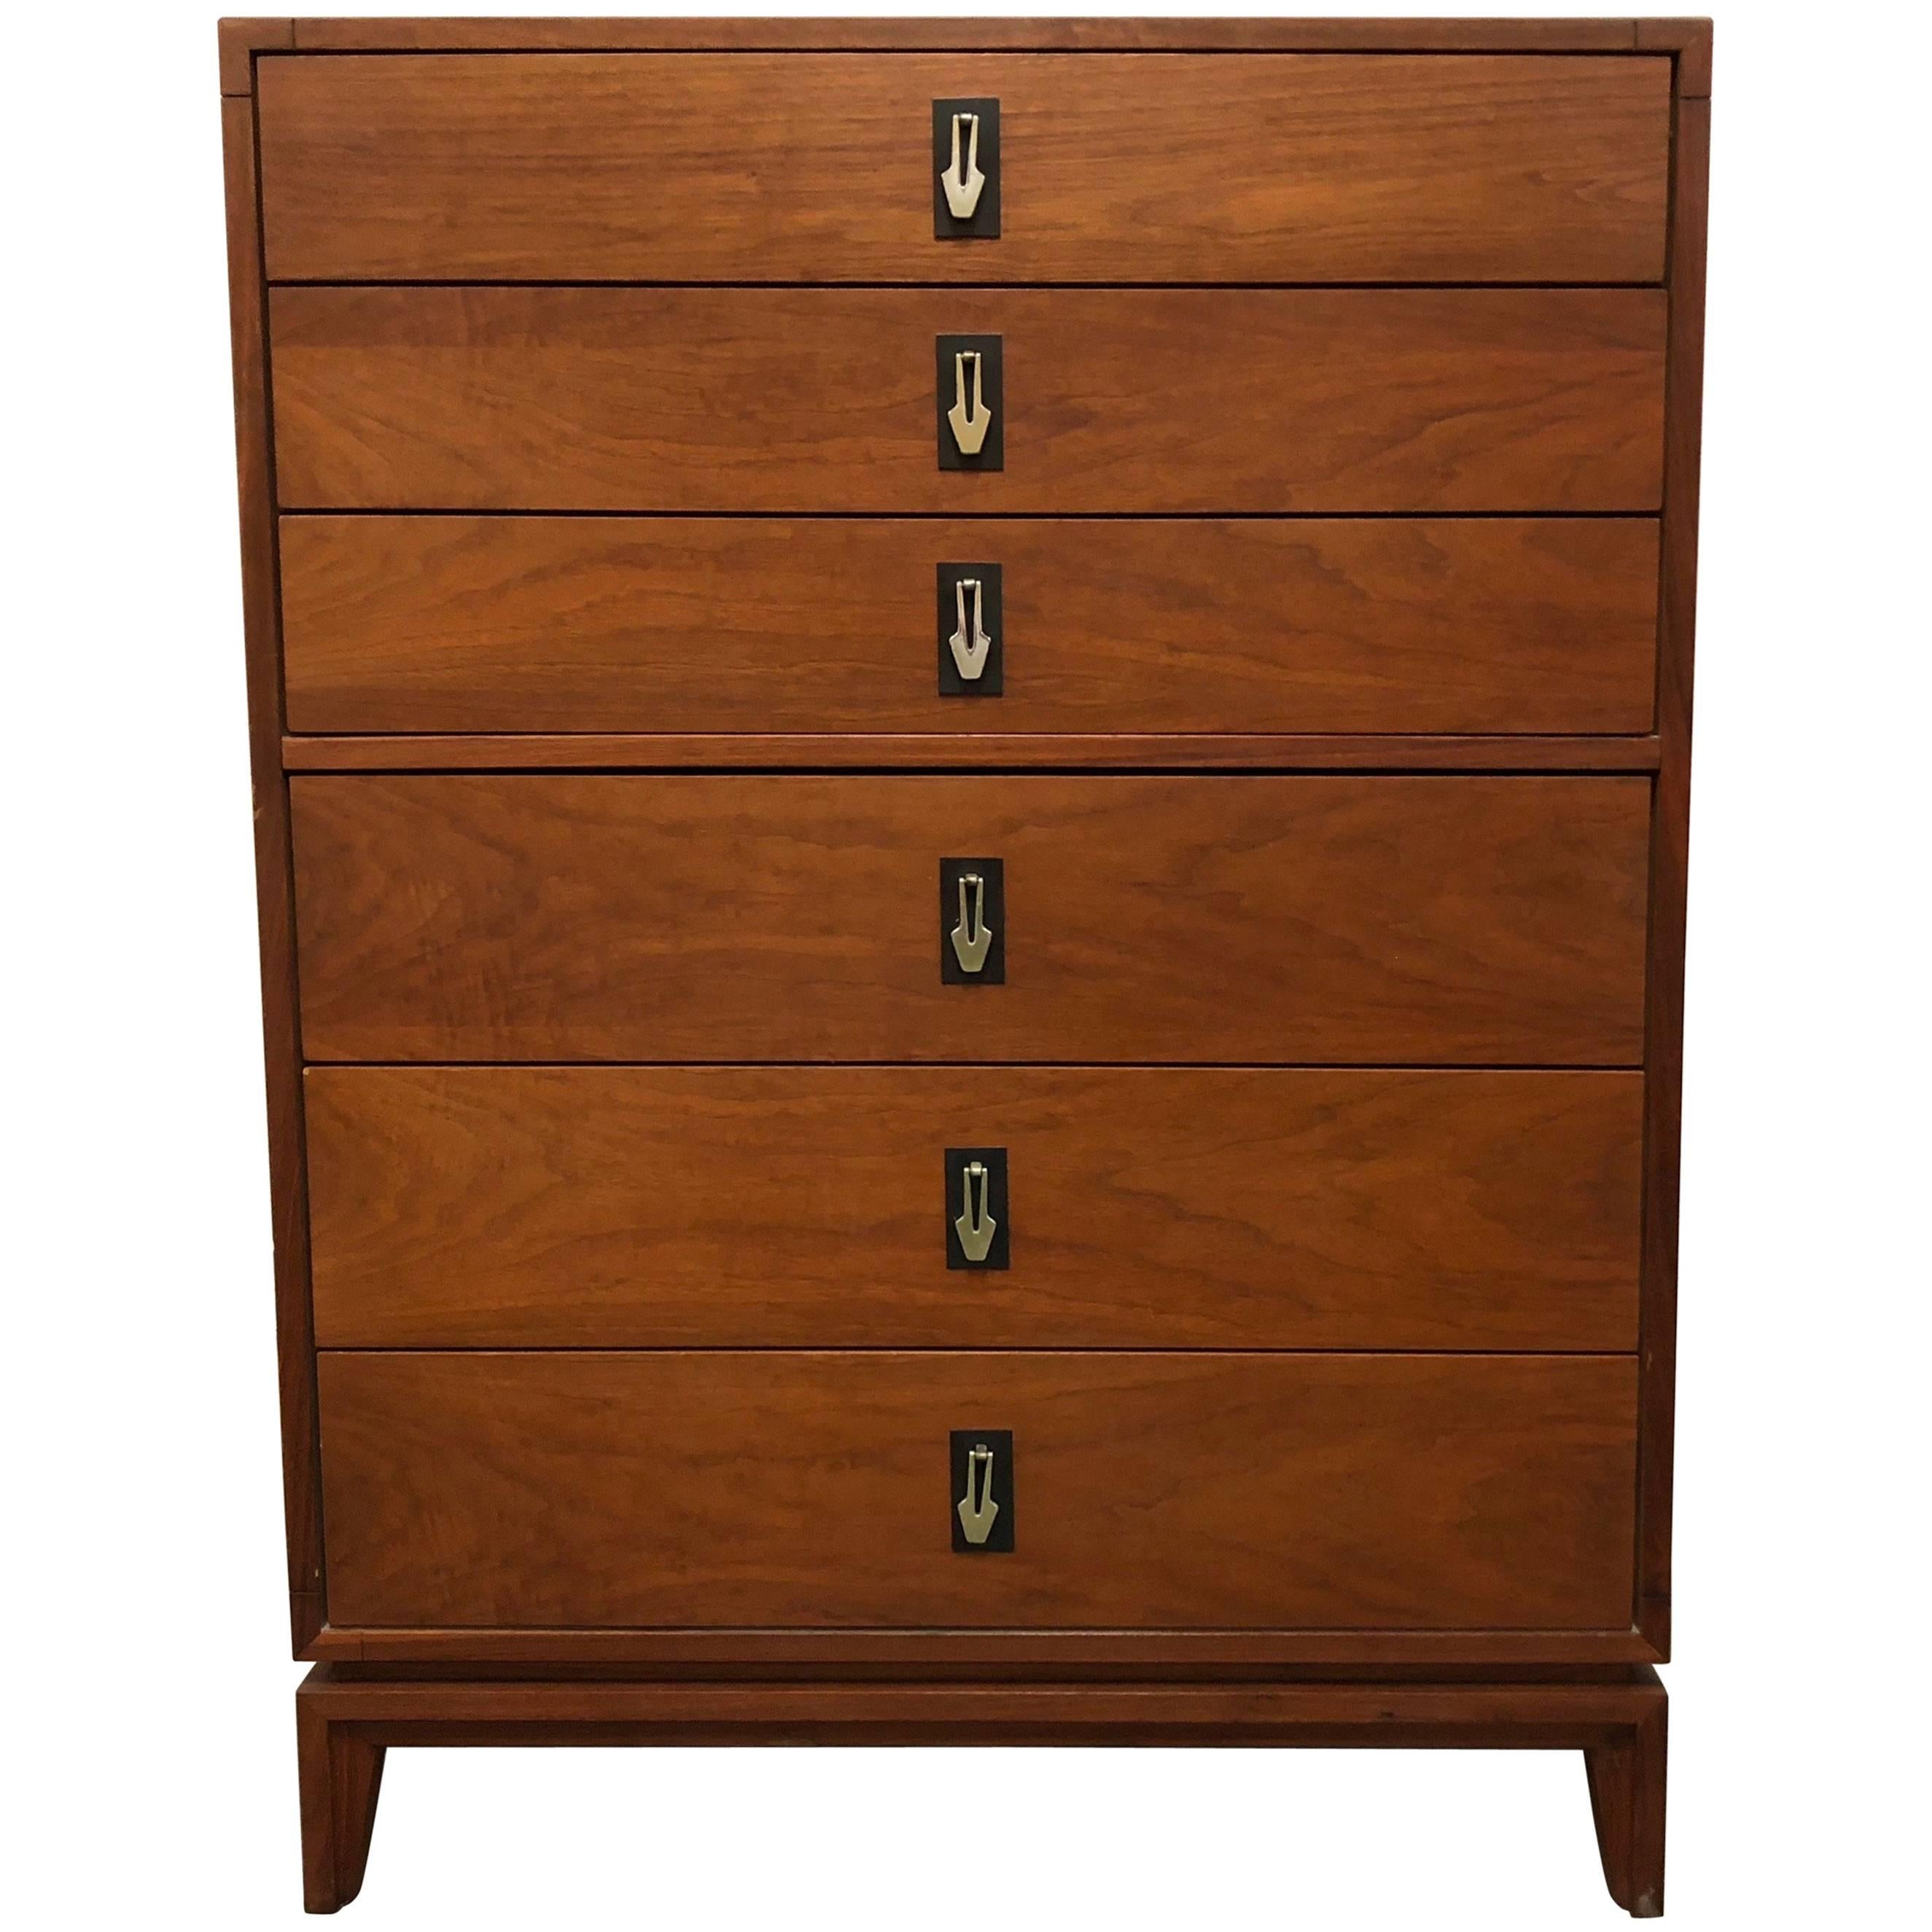 Midcentury Dresser with Leather Hardware Detail